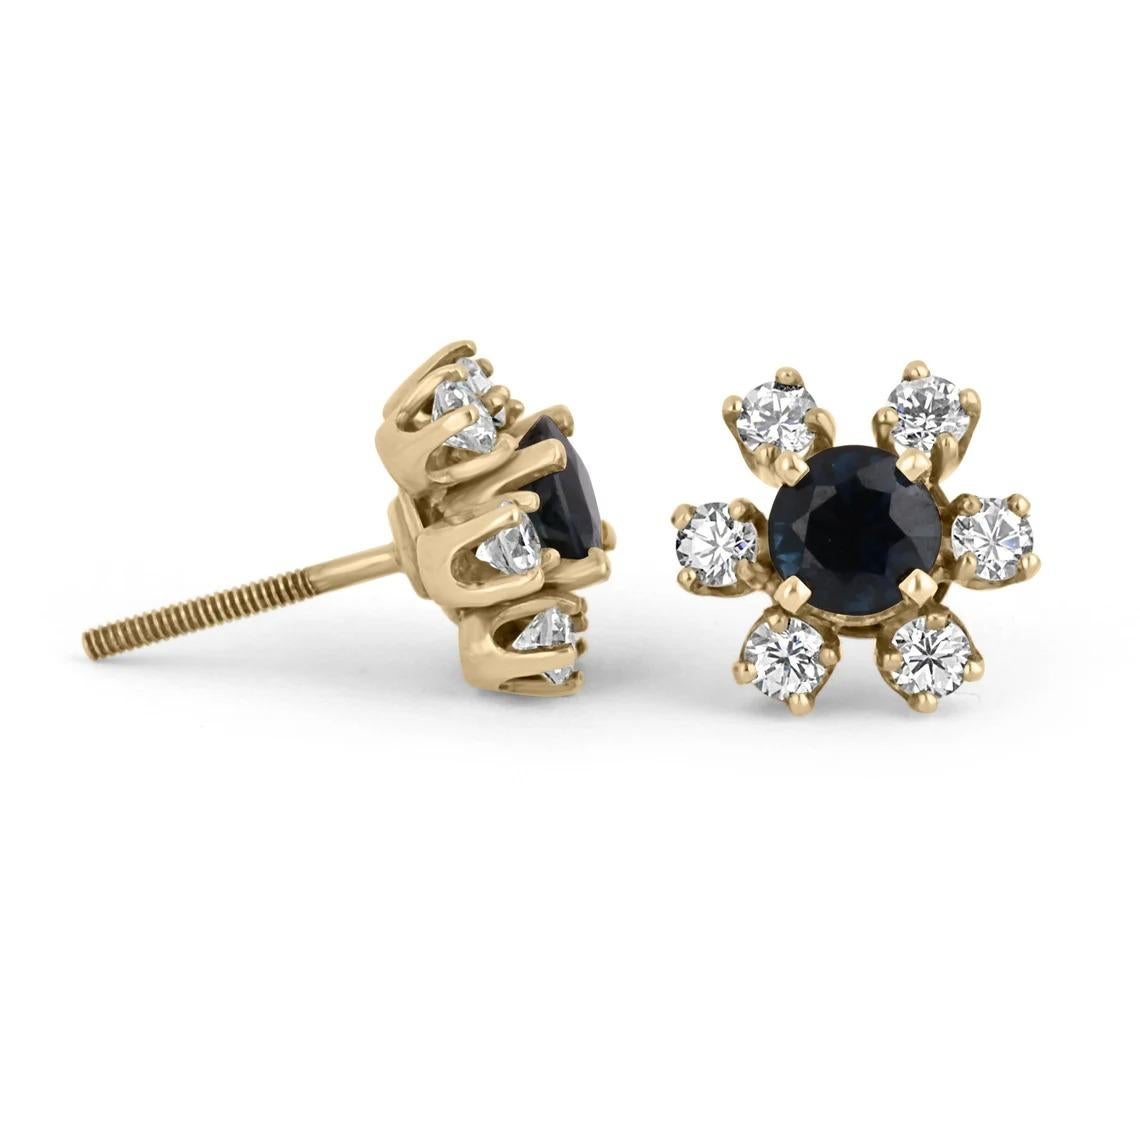 A stunning, vintage pair of natural sapphire and diamond stud earrings. The center stone holds 3/4's of fine quality, rich blue sapphires; surrounding the lovely gem are six brilliant round cut diamonds creating a halo effect resulting in a floral